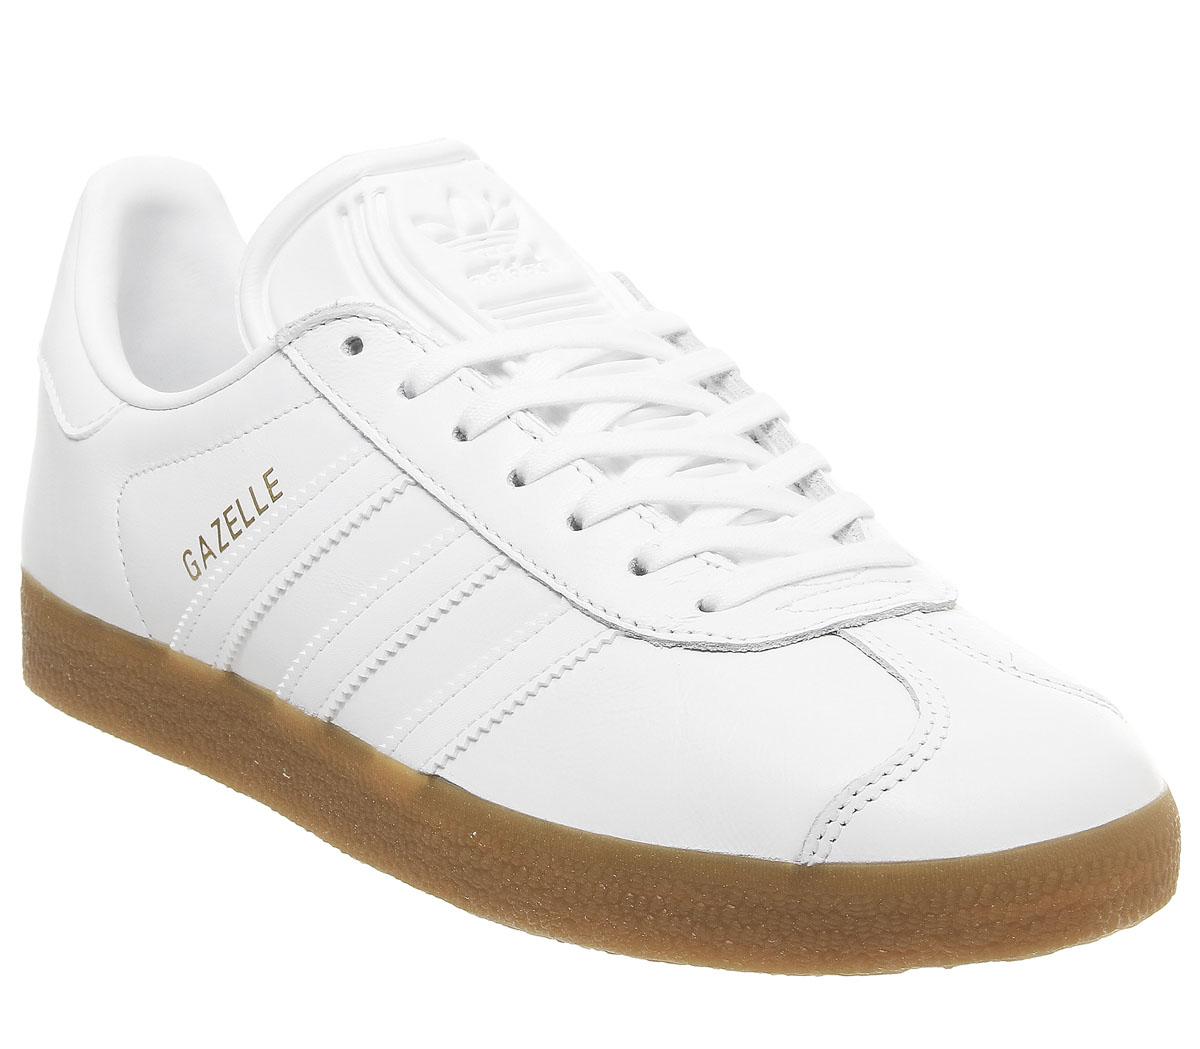 mens white trainers with gum sole